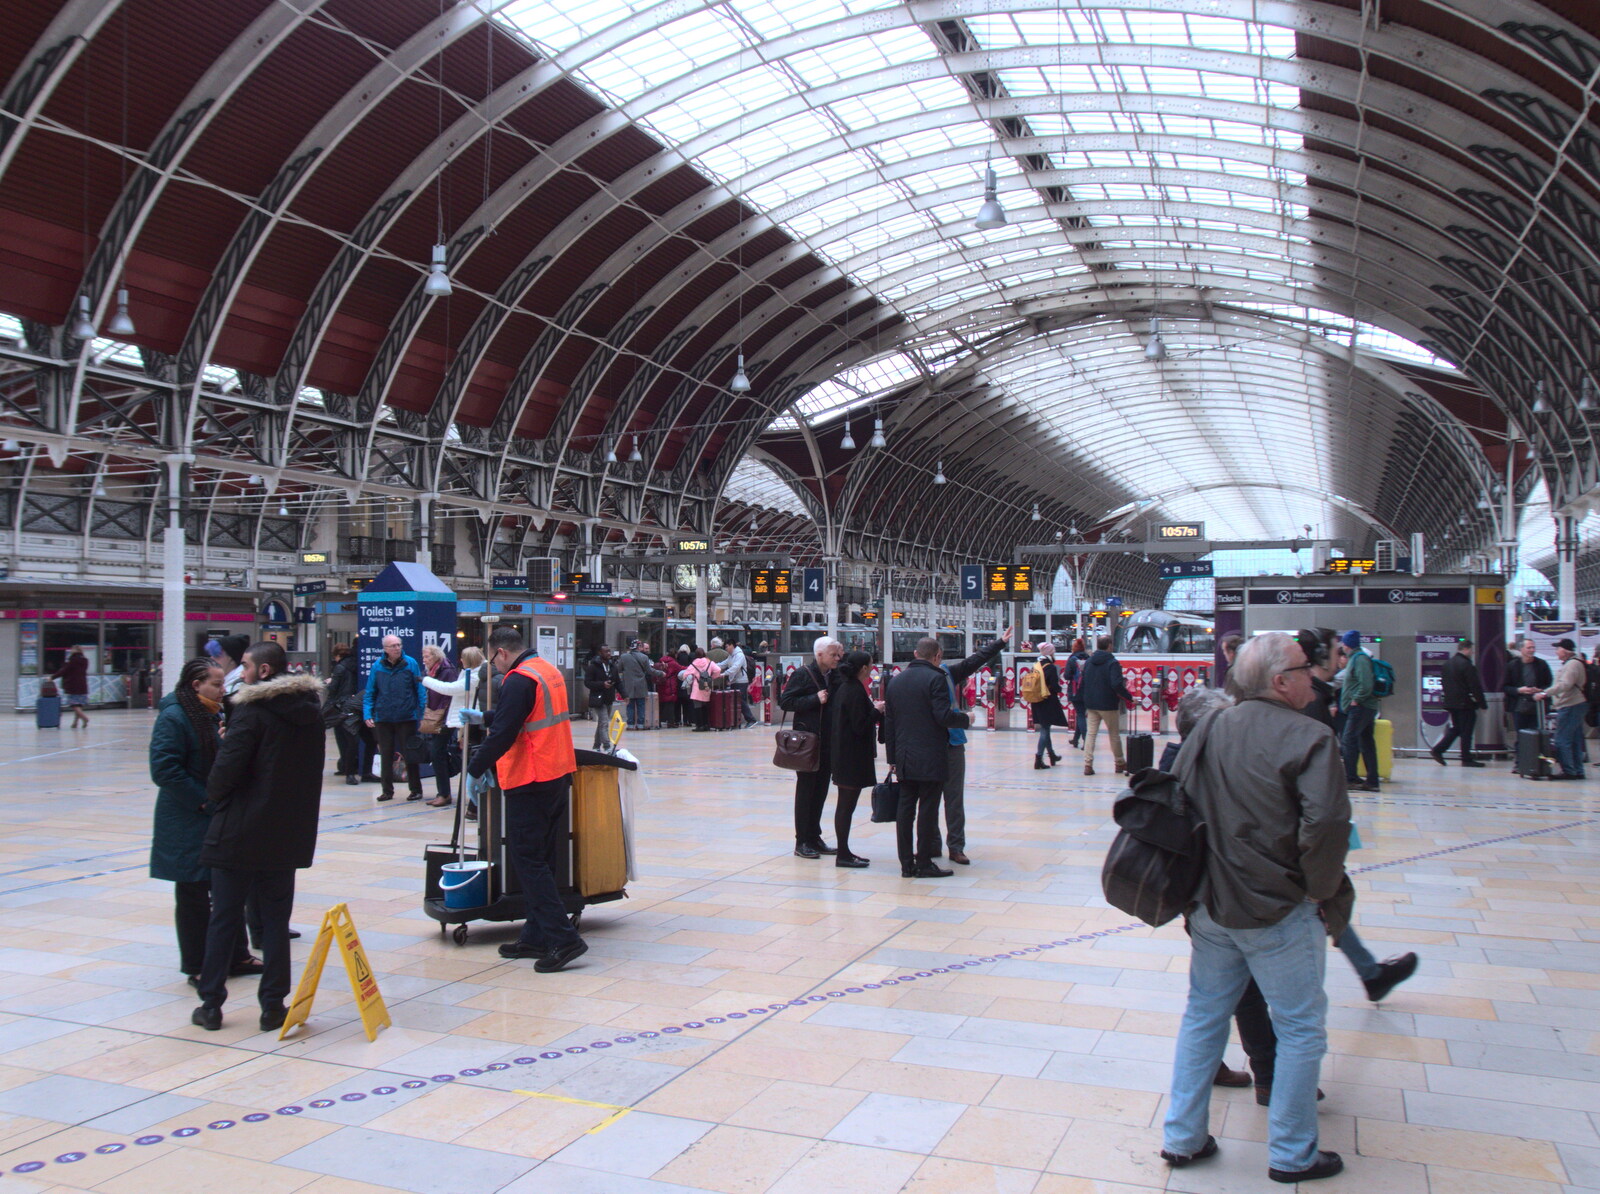 People mill around at Paddington from A Small Transport Miscellany, London - 7th January 2020